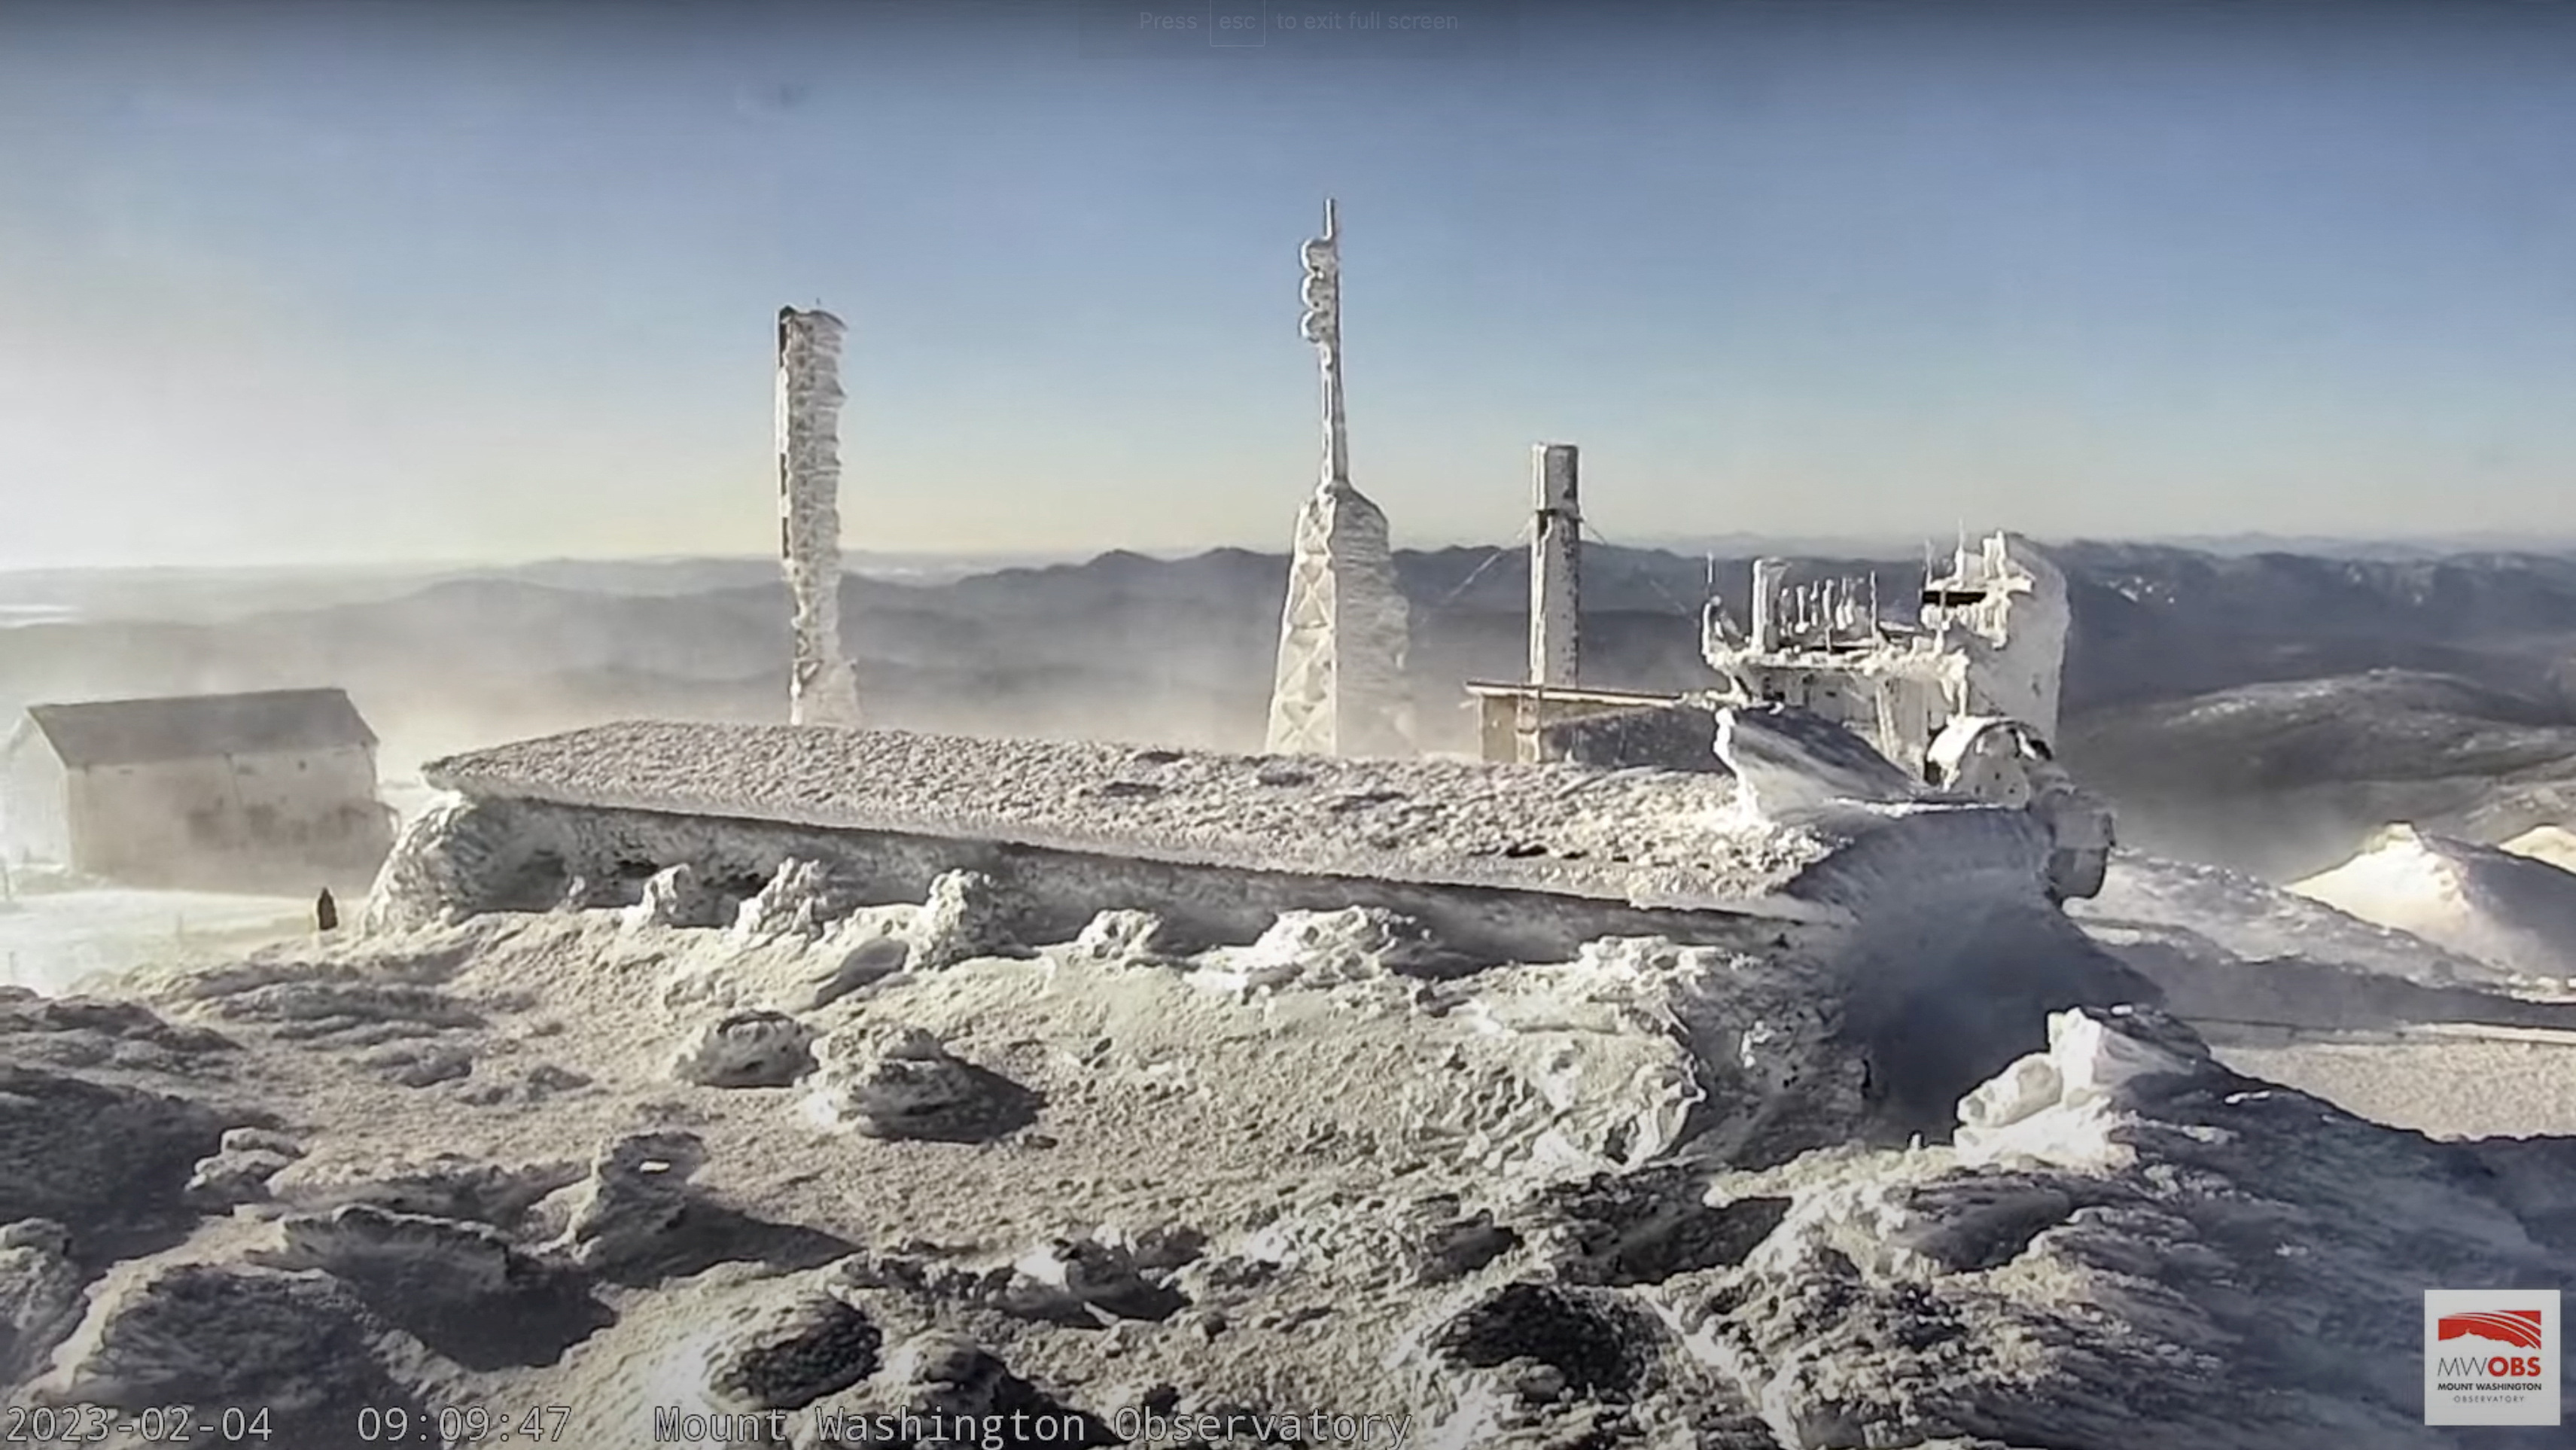 Mount Washington Observatory measures extreme cold temperatures in New Hampshire